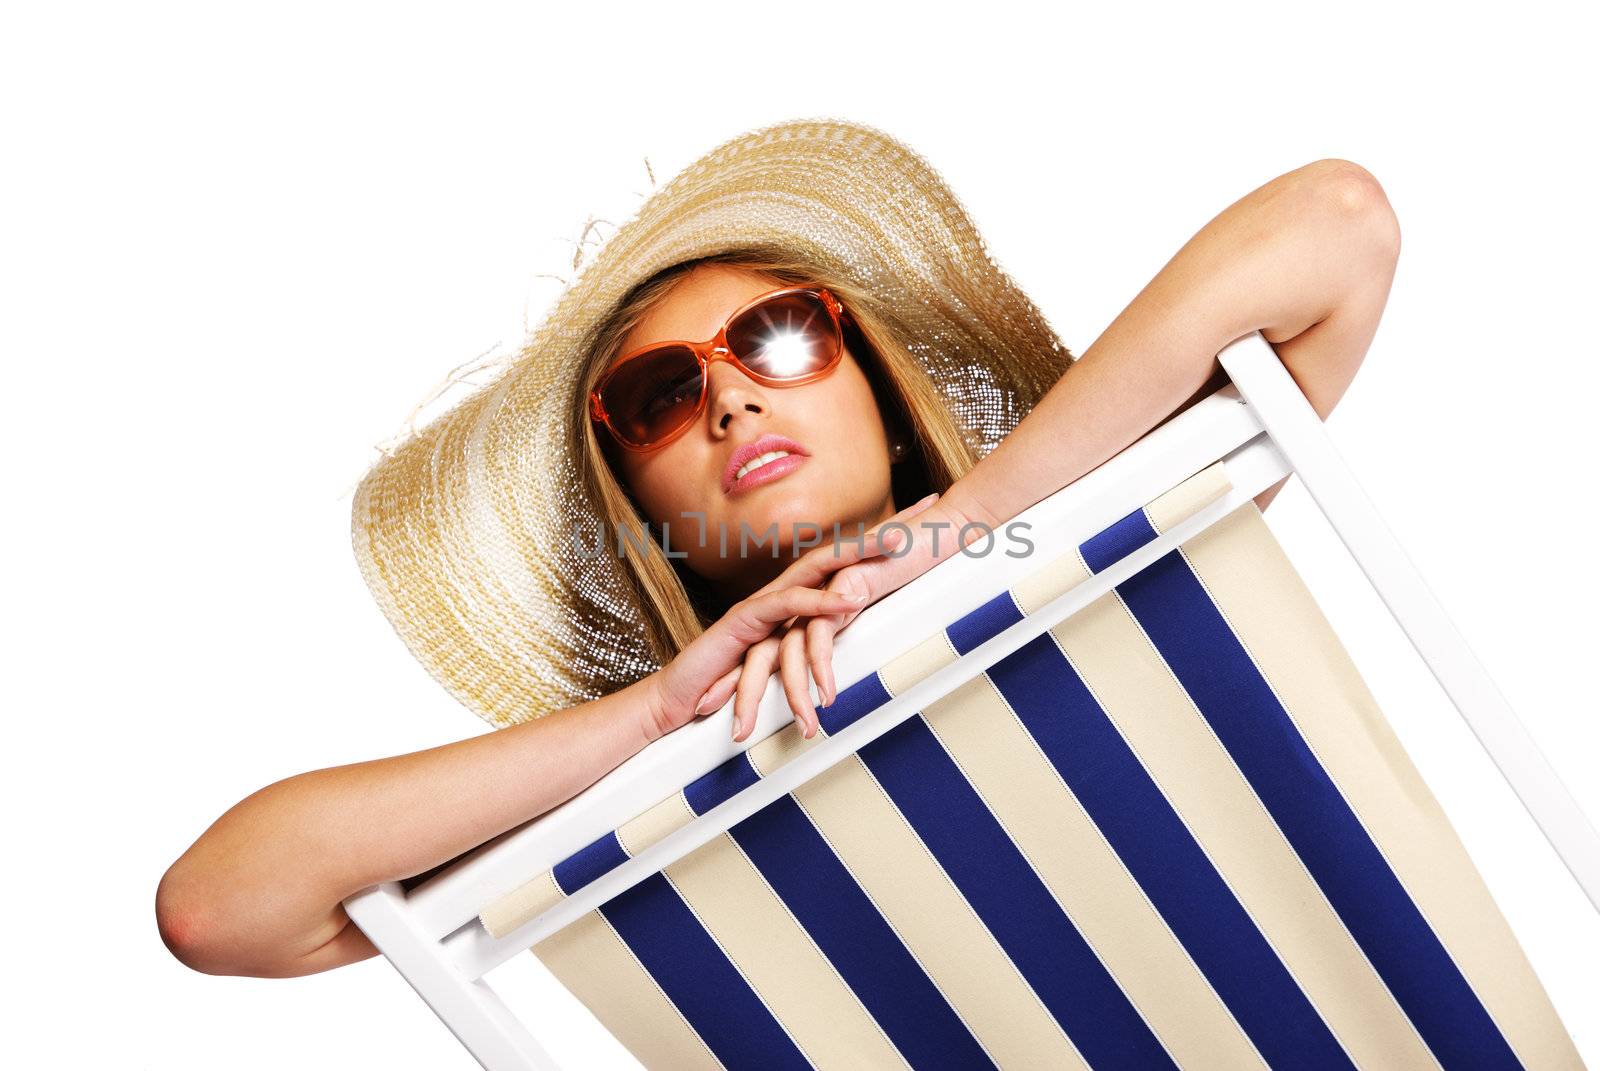 Beautiful young woman with sunglasses relaxing on beach chair isolated on white background